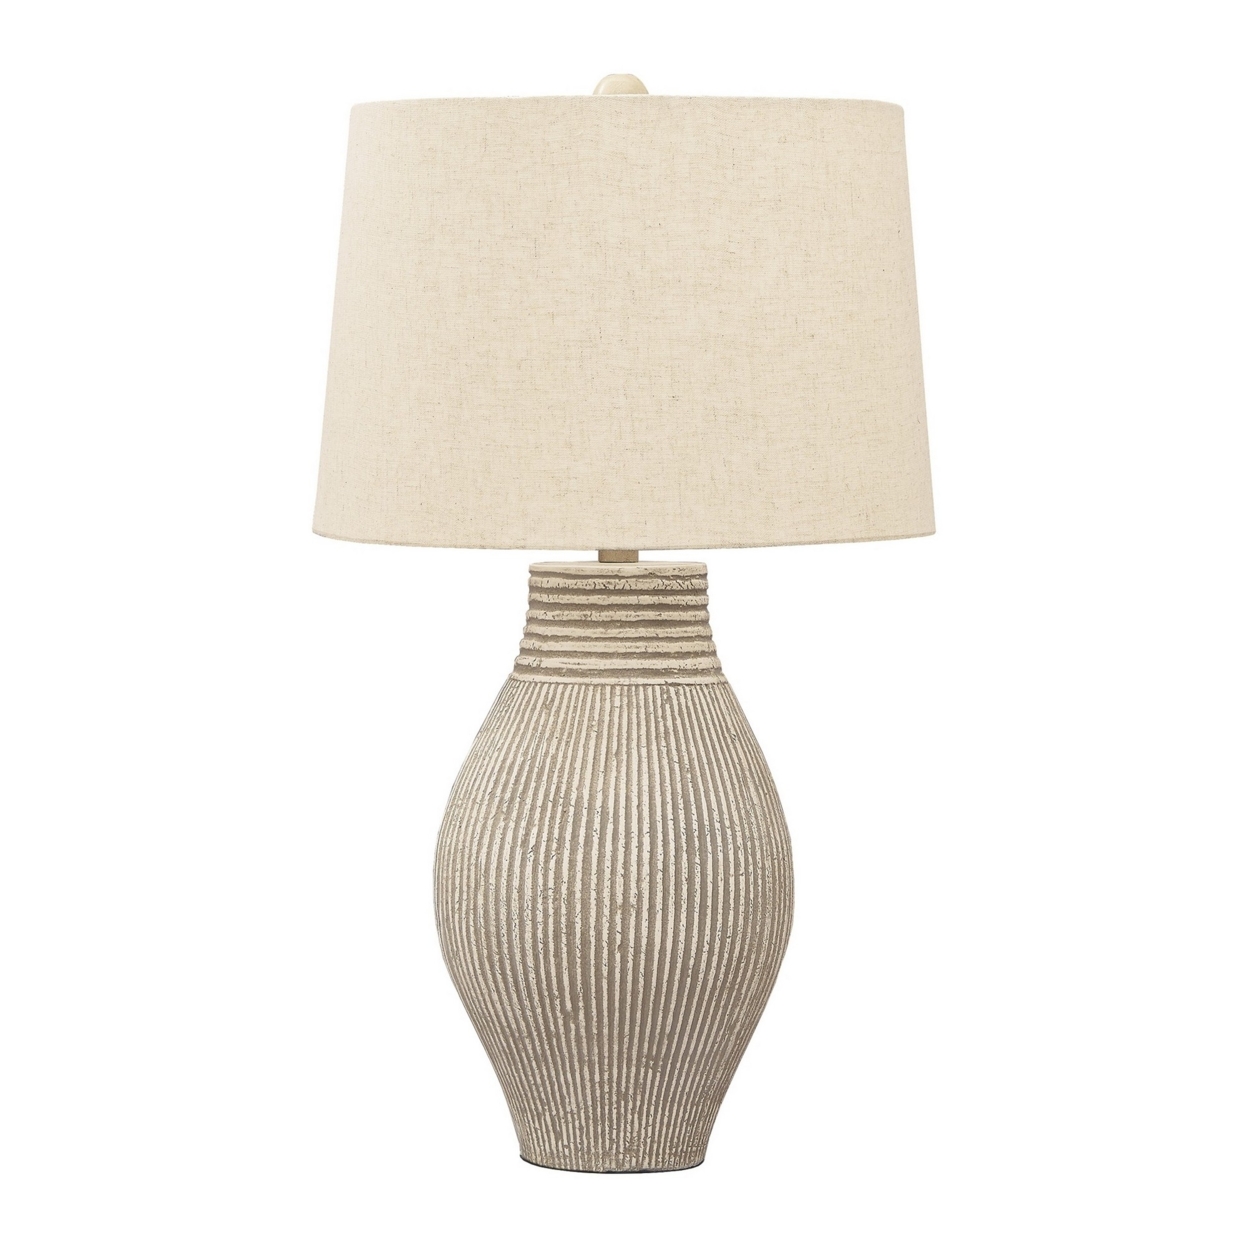 Drum Shade Table Lamp With Paper Composite Base, Beige- Saltoro Sherpi